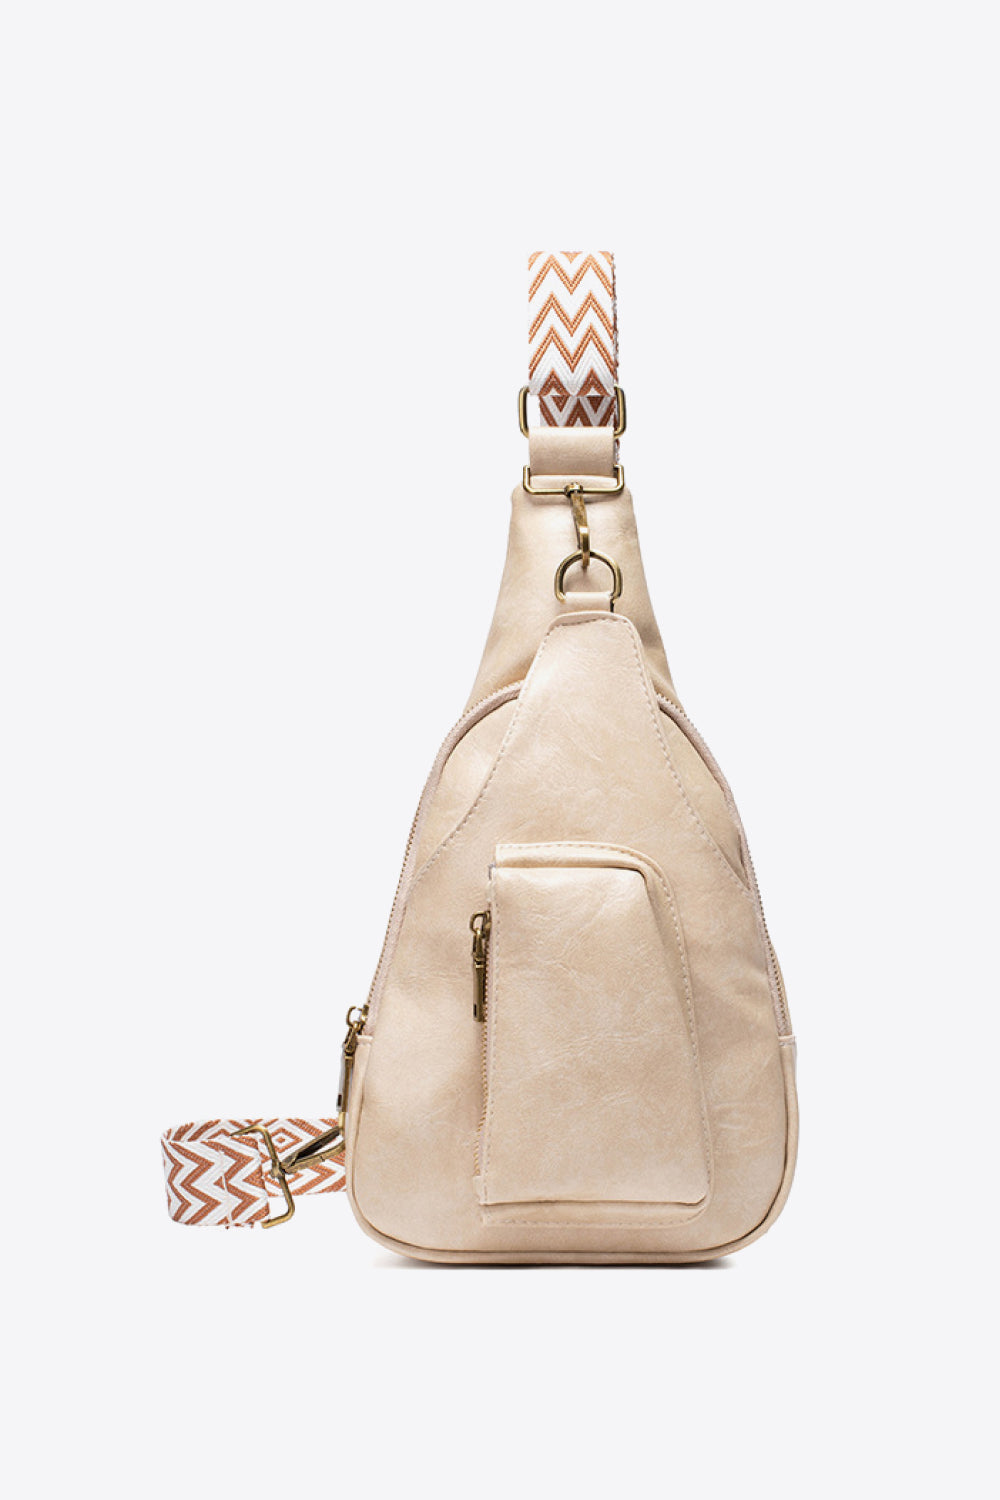 White Smoke All The Feels PU Leather Sling Bag Sentient Beauty Fashions bags &amp; totes